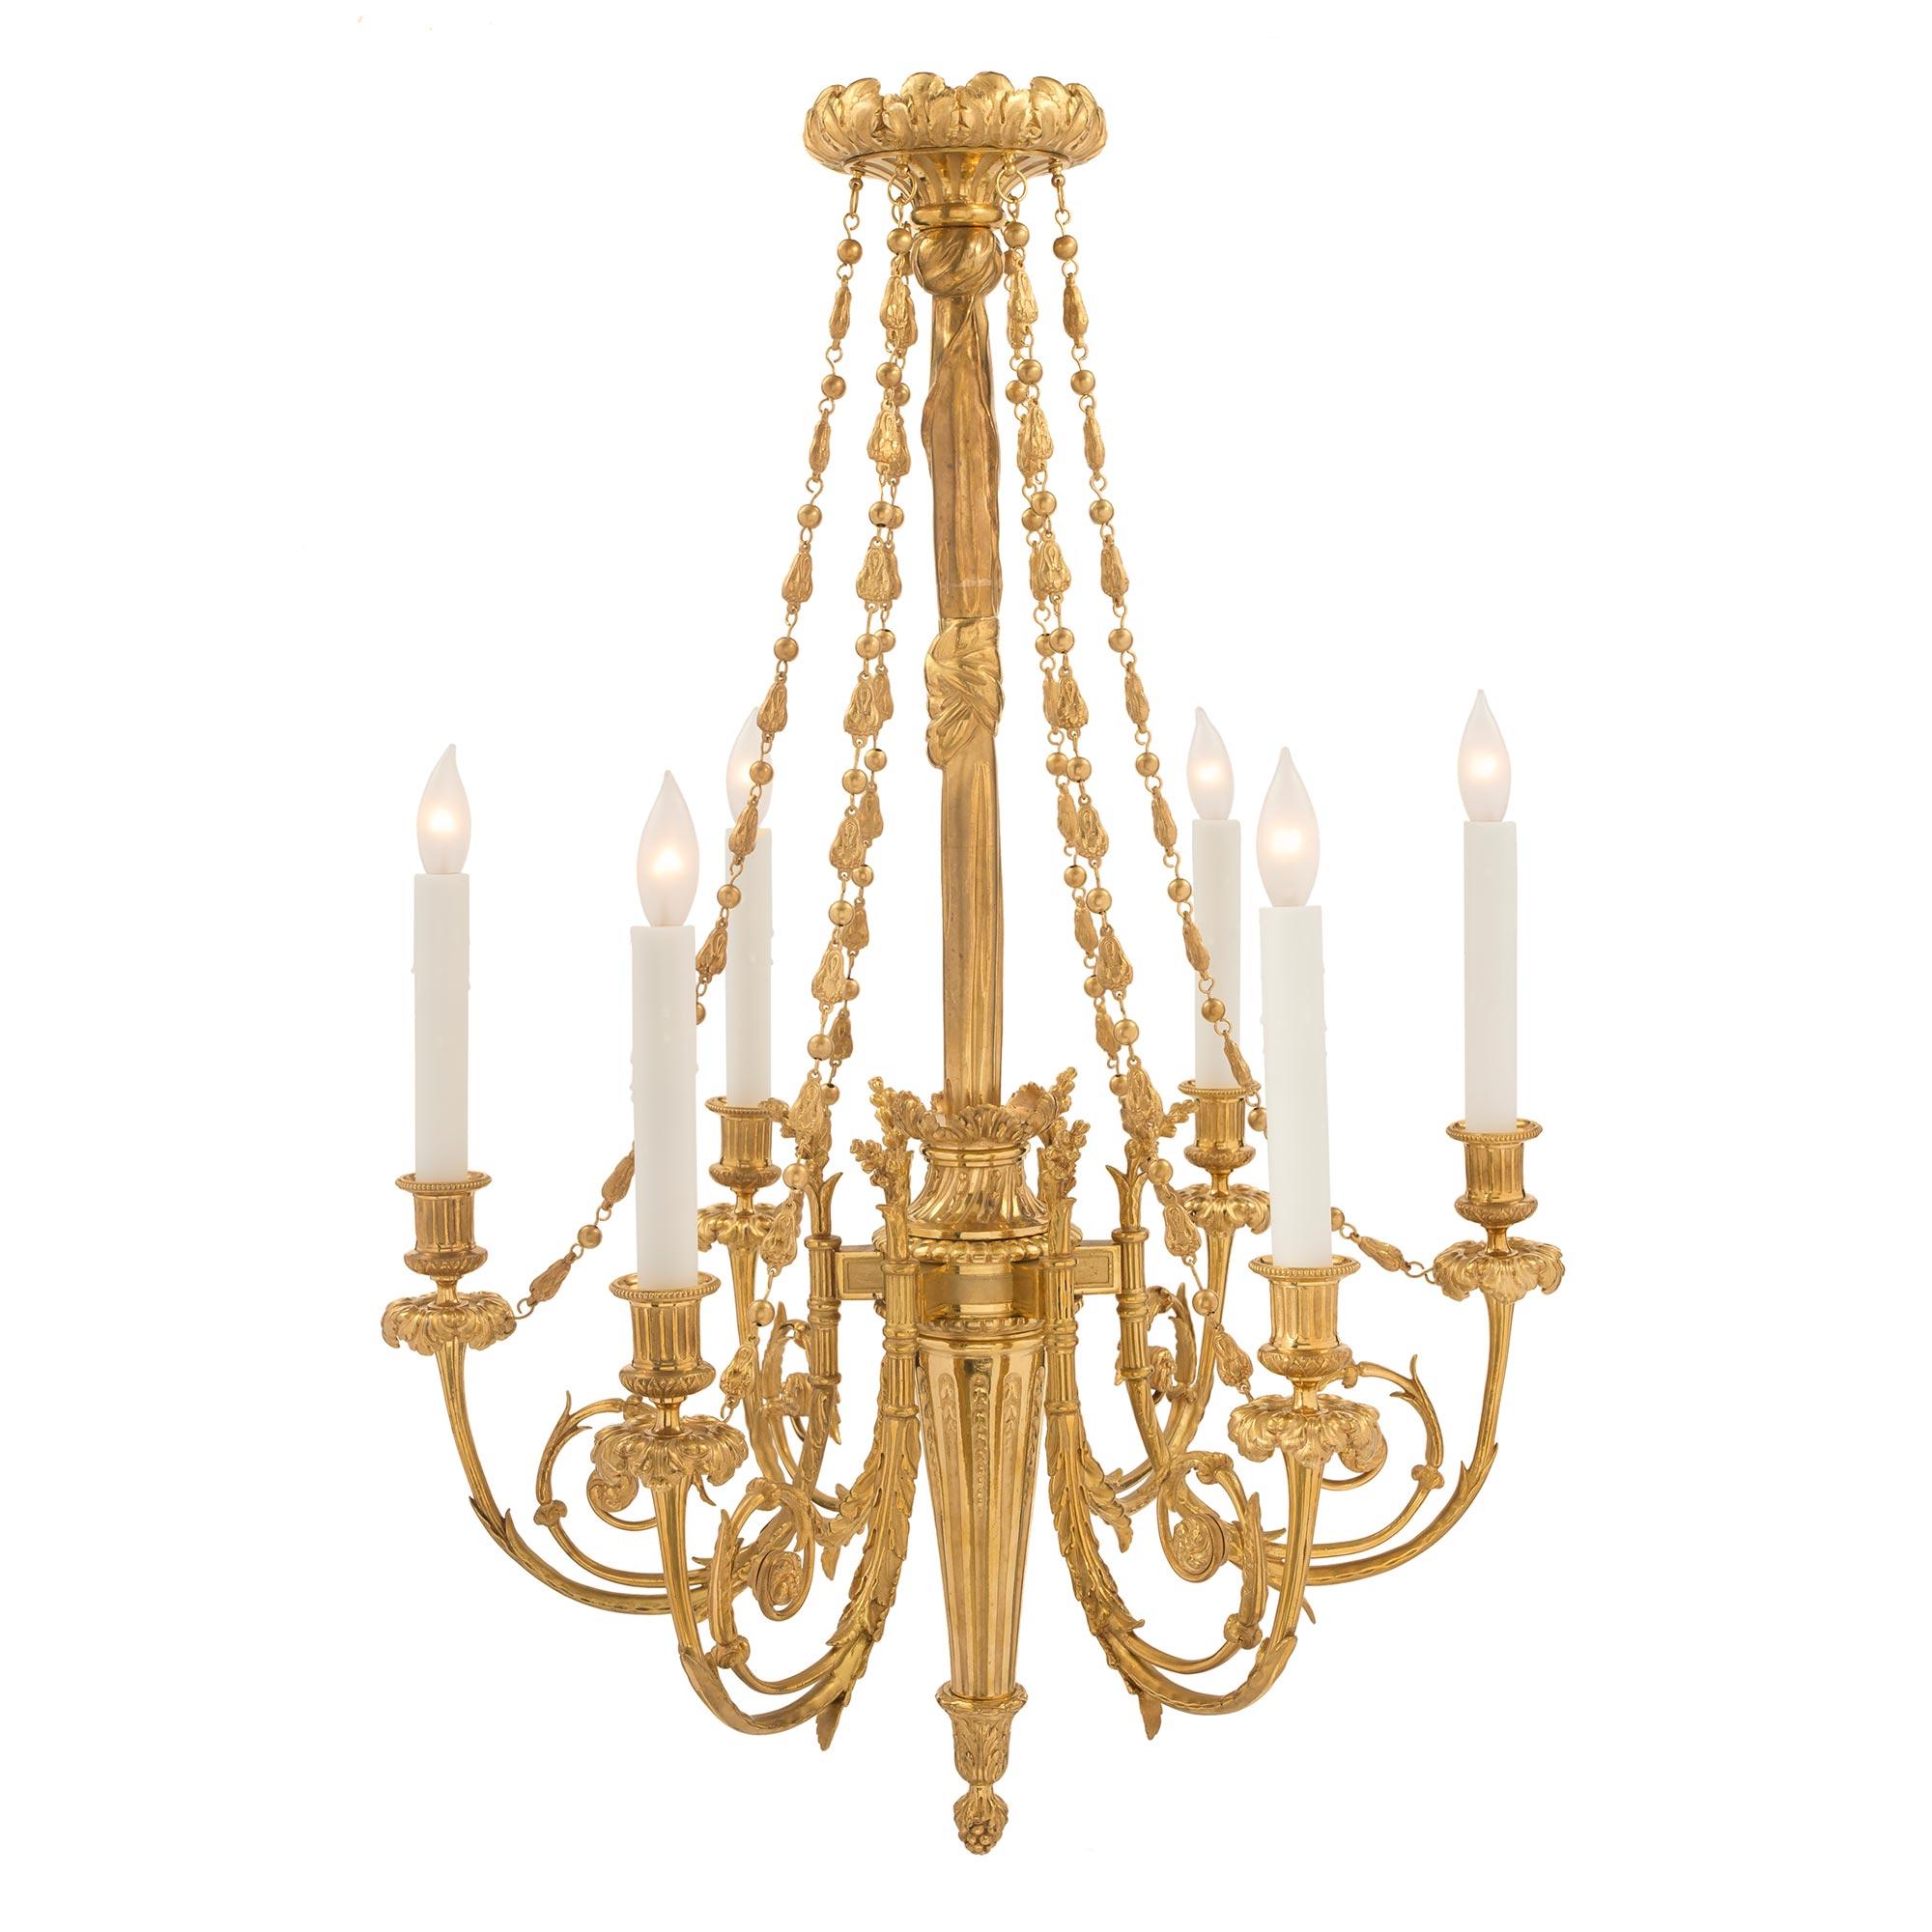 A striking and extremely elegant French 19th century Louis XVI st. six arm ormolu chandelier. The chandelier is centered by a fine bottom inverted acorn finial below the tapered fluted support. Each arm displays a beautiful scrolled Rinceau shape